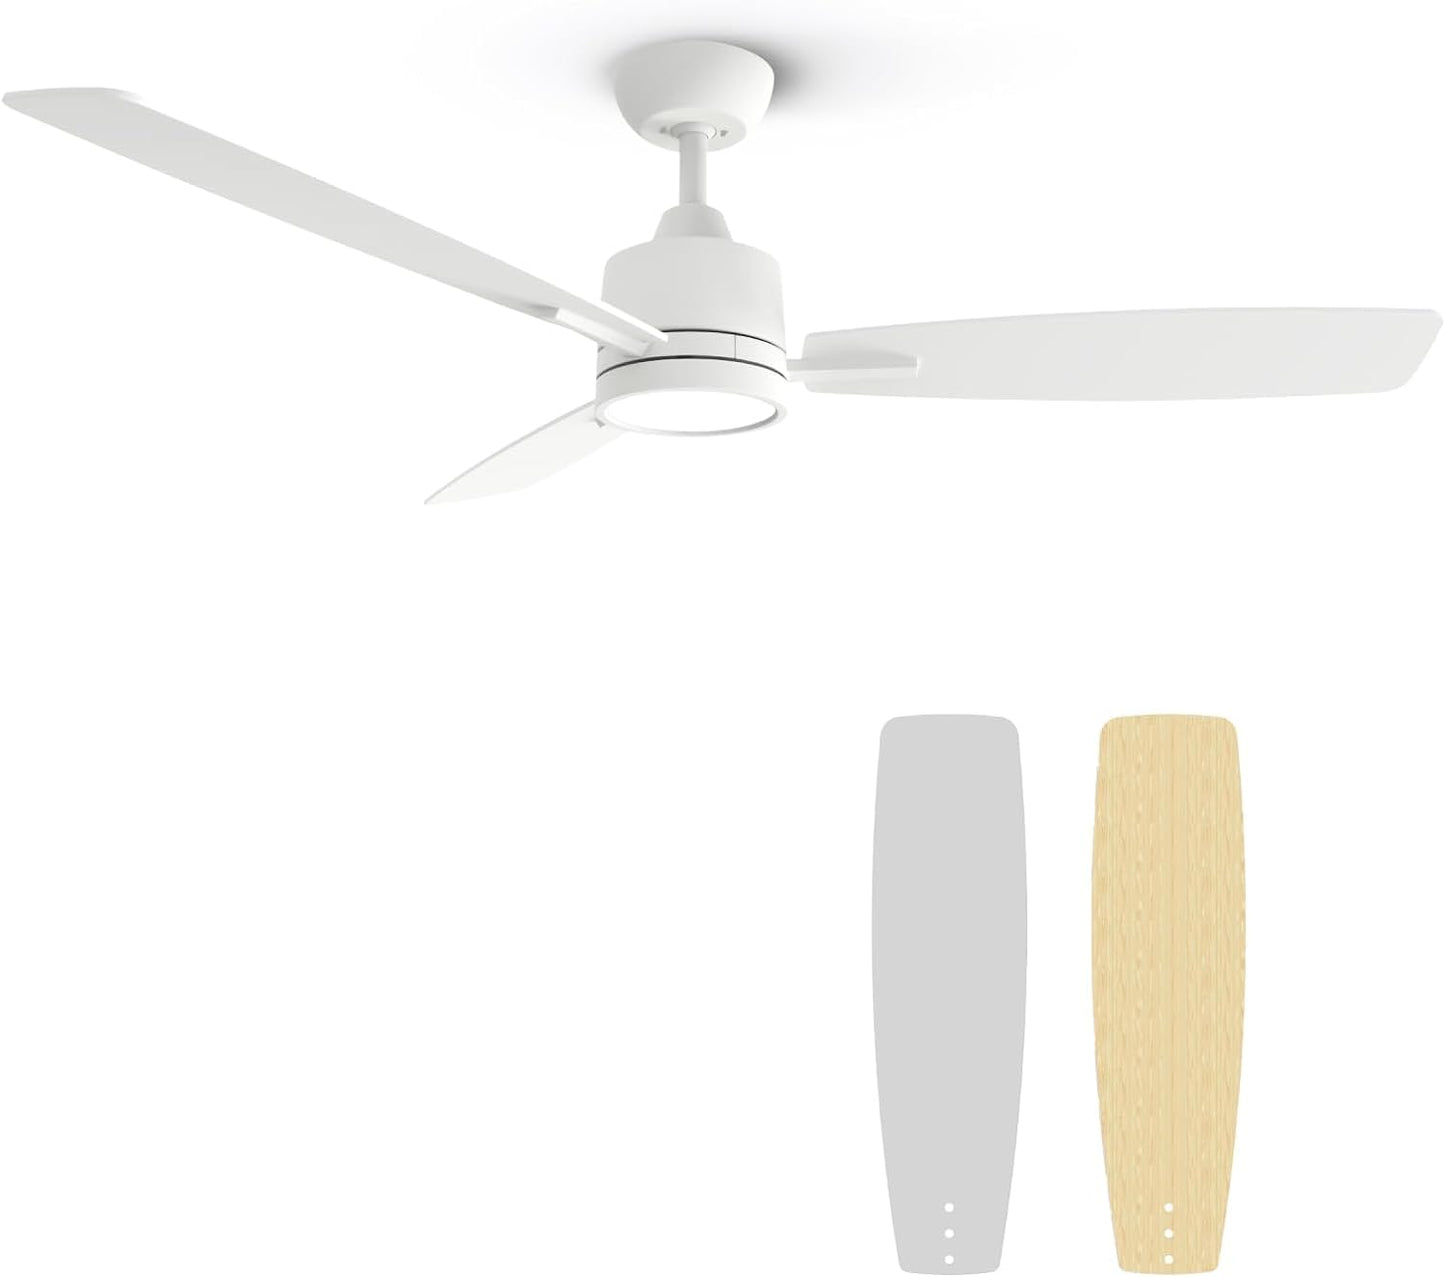 TALOYA Ceiling Fans with Lights and Remote Control 52 inch DC Motor Ultra-Quiet Ceiling Fan with 3 Color Led Light 6 Speeds 3 Reversible Blades for Living Room Dining Room Bedroom Patio